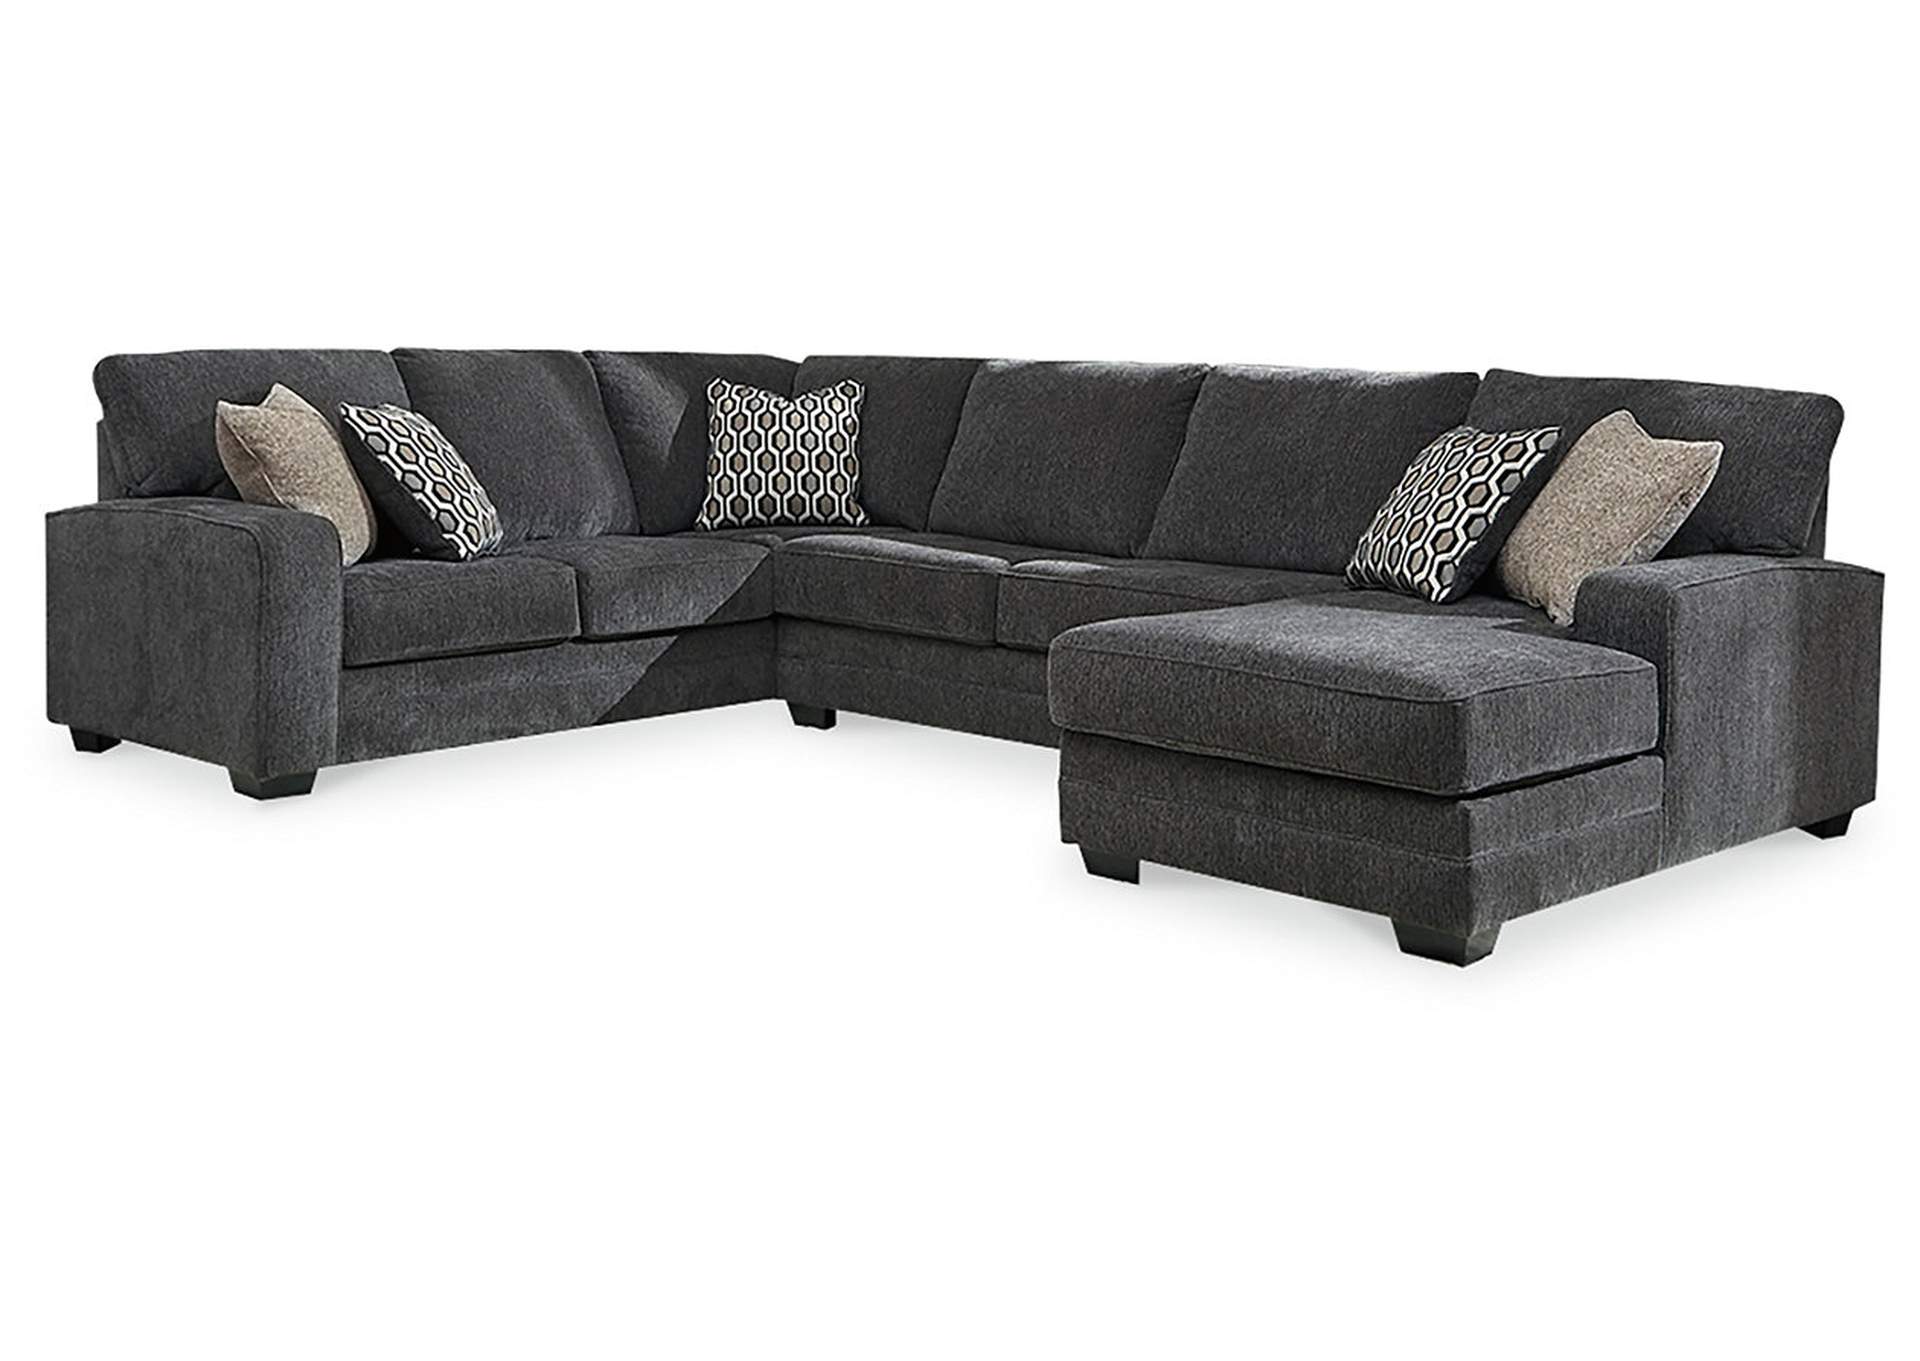 Tracling 3-Piece Sectional with Ottoman,Benchcraft